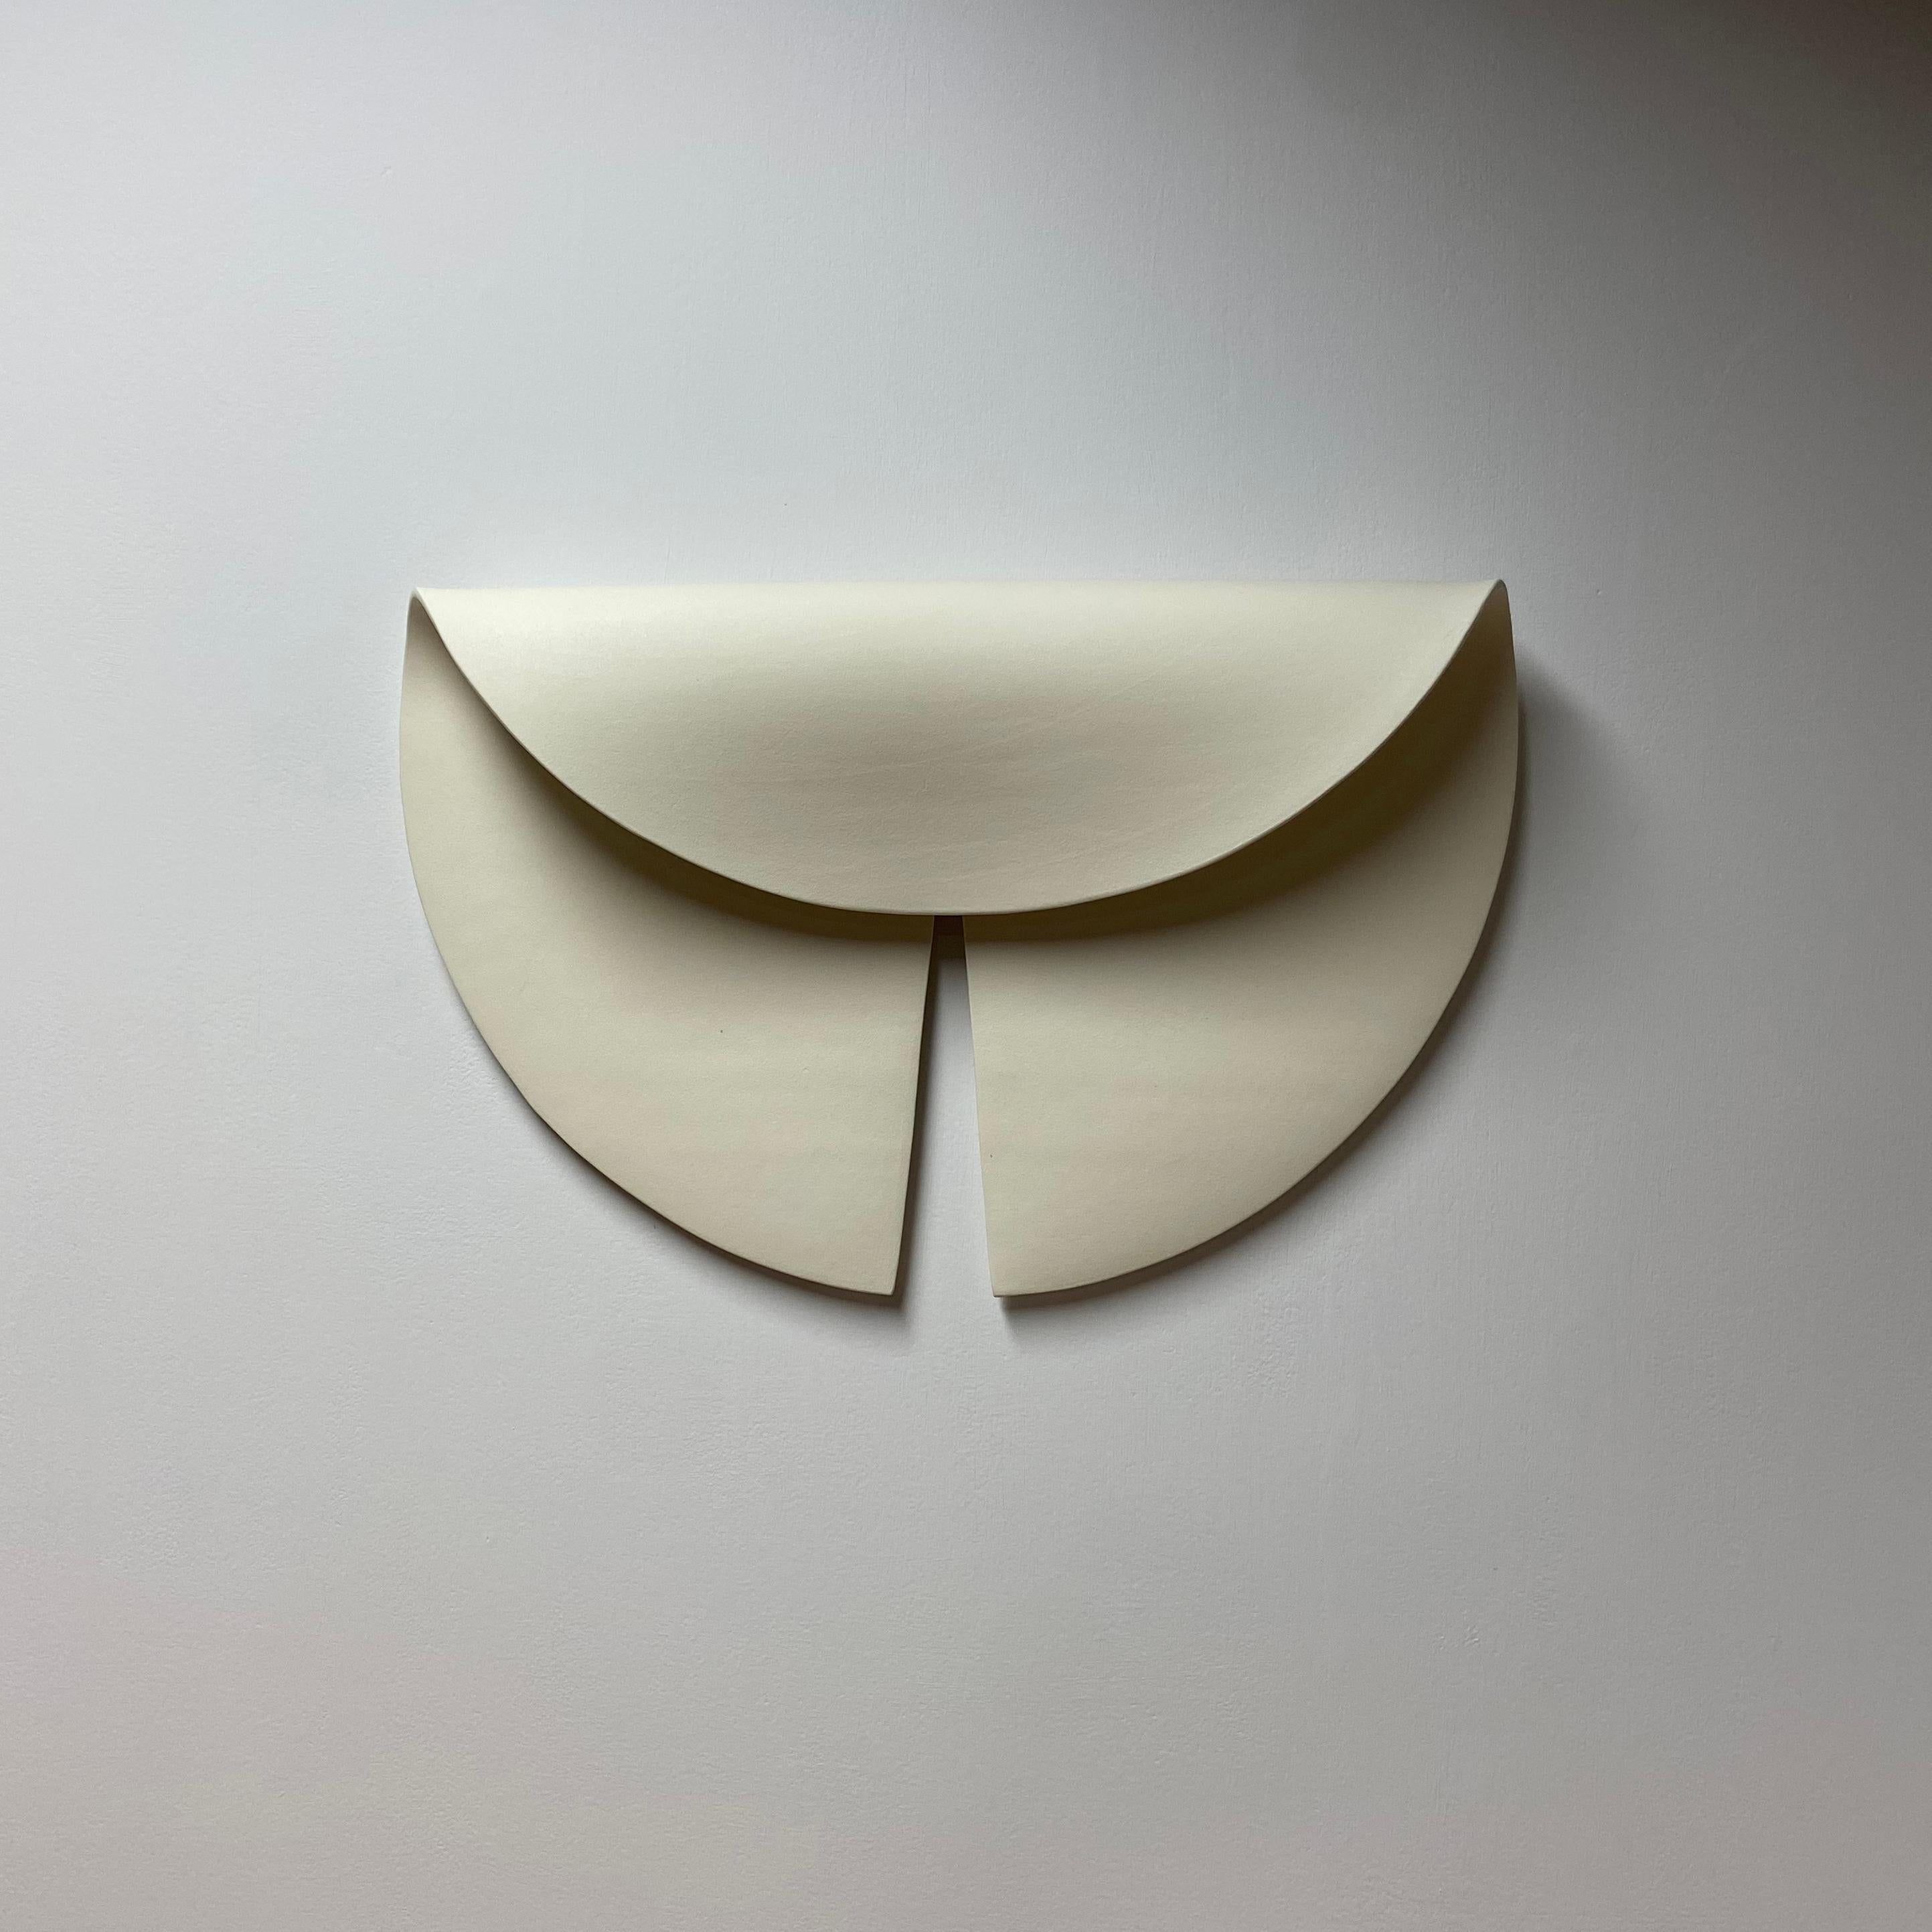 Modern Ceramic Wall Sculpture: 'Leaf' / By Olivia Barry For Sale